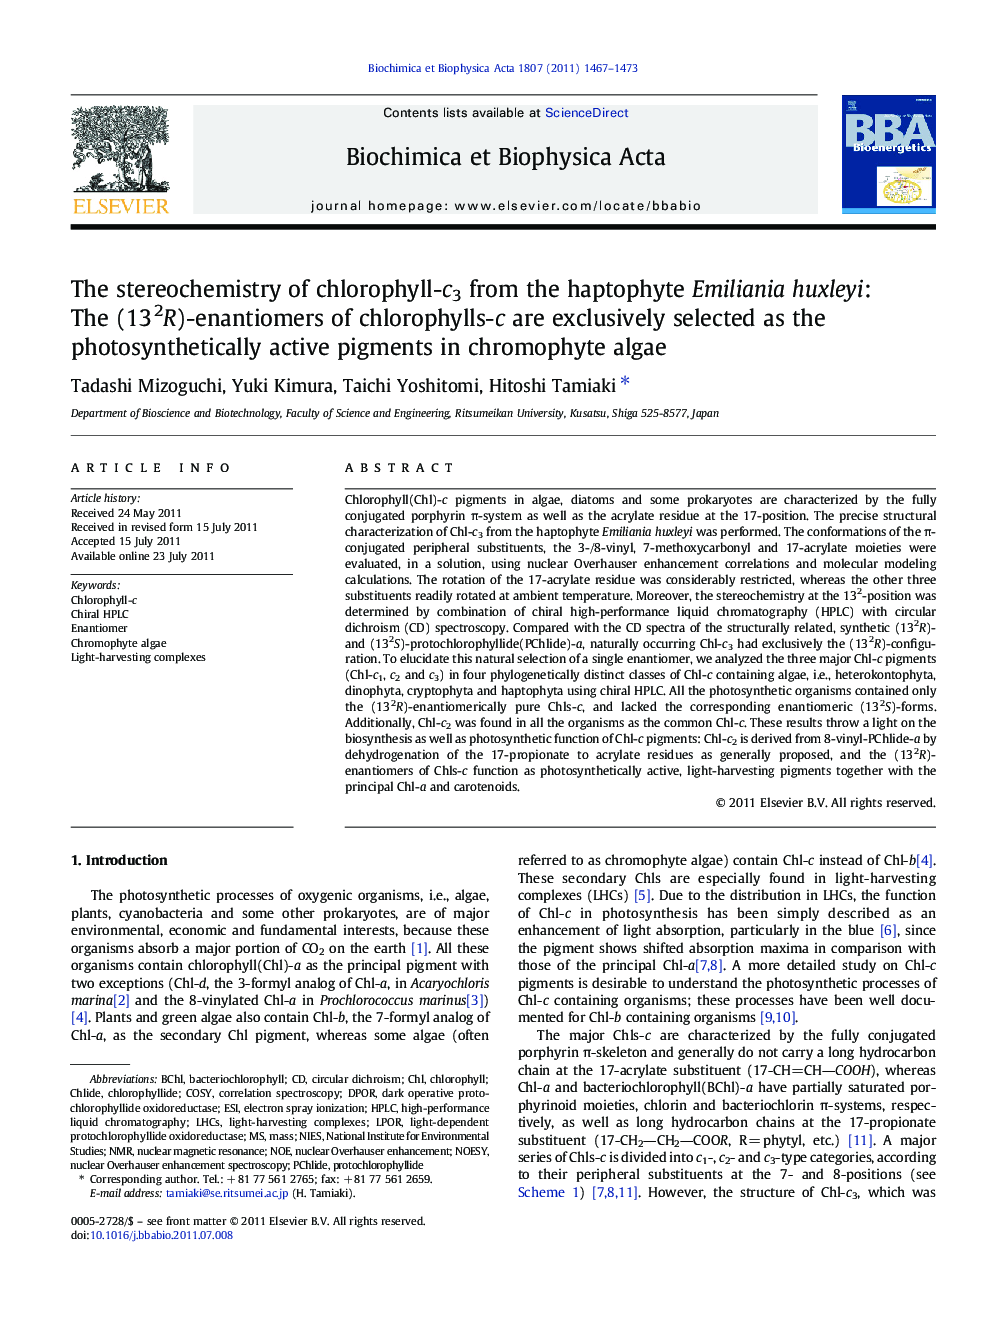 The stereochemistry of chlorophyll-c3 from the haptophyte Emiliania huxleyi: The (132R)-enantiomers of chlorophylls-c are exclusively selected as the photosynthetically active pigments in chromophyte algae